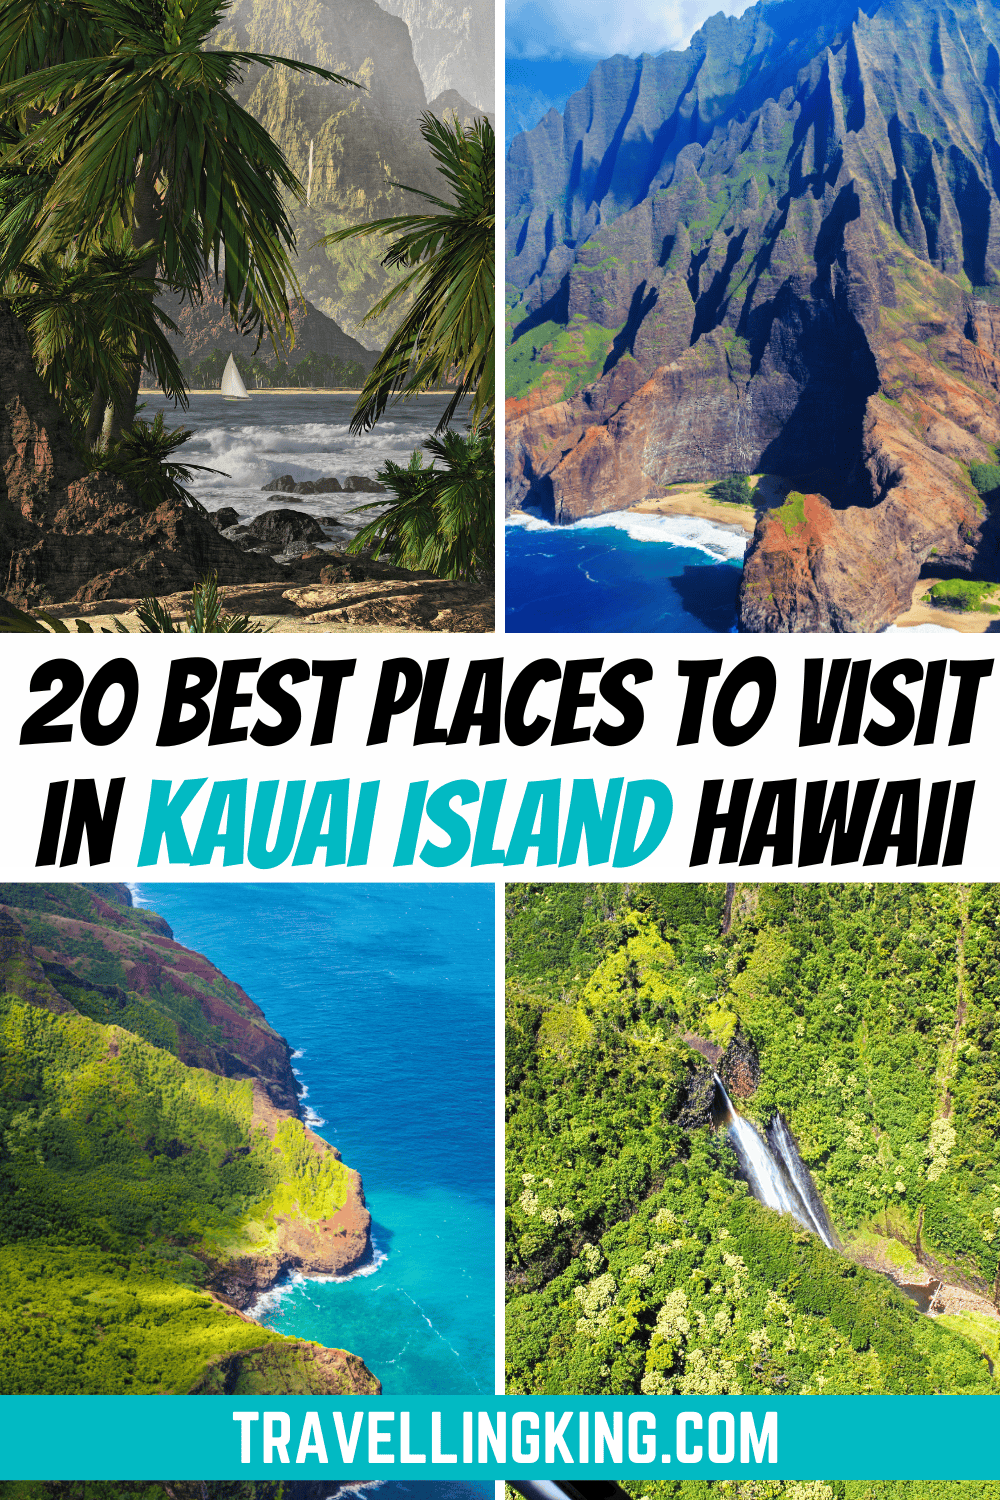 20 Best Places to Visit in Kauai Island, Hawaii